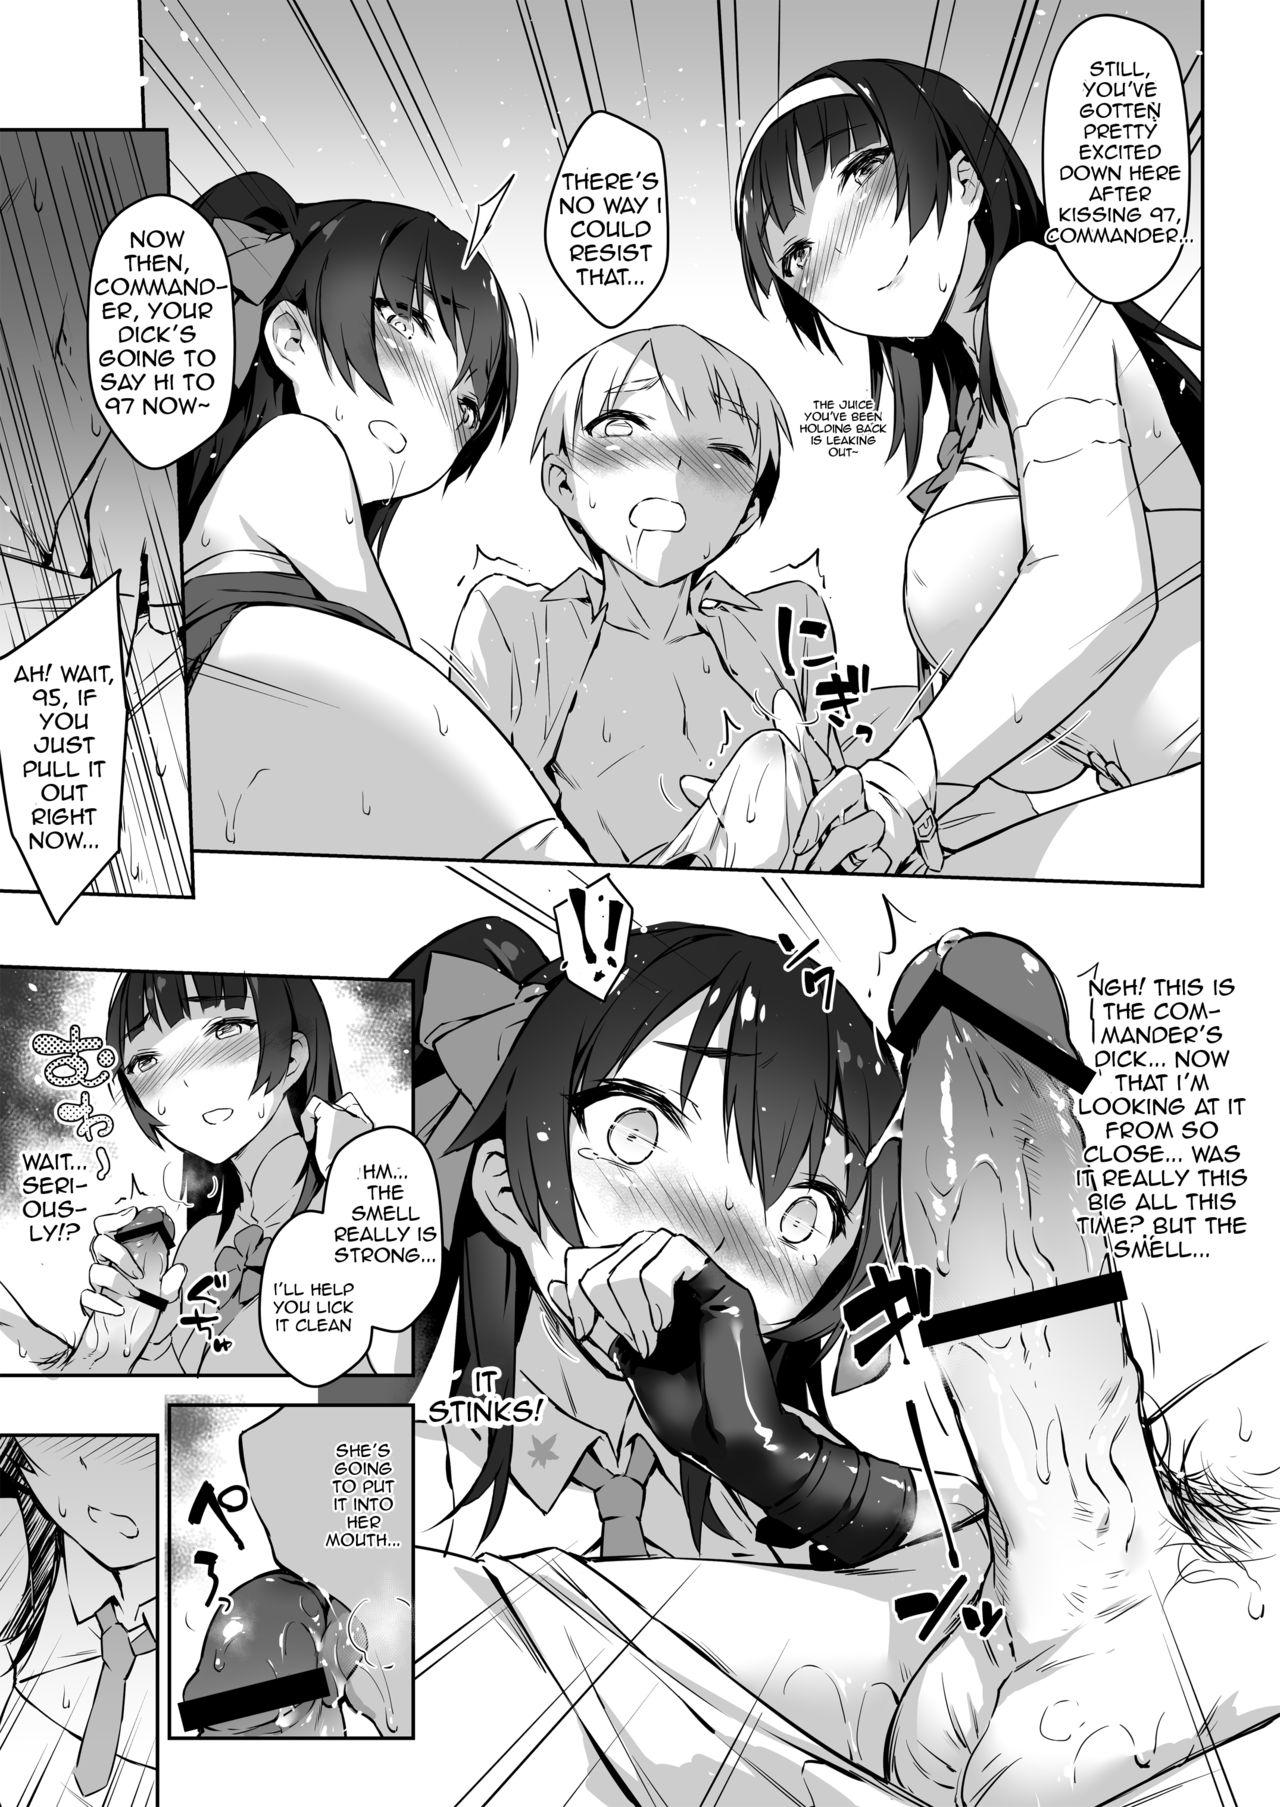 Masturbation Type 95 Type 97, Let Your Big Sister Teach You! - Girls frontline Assfucking - Page 11